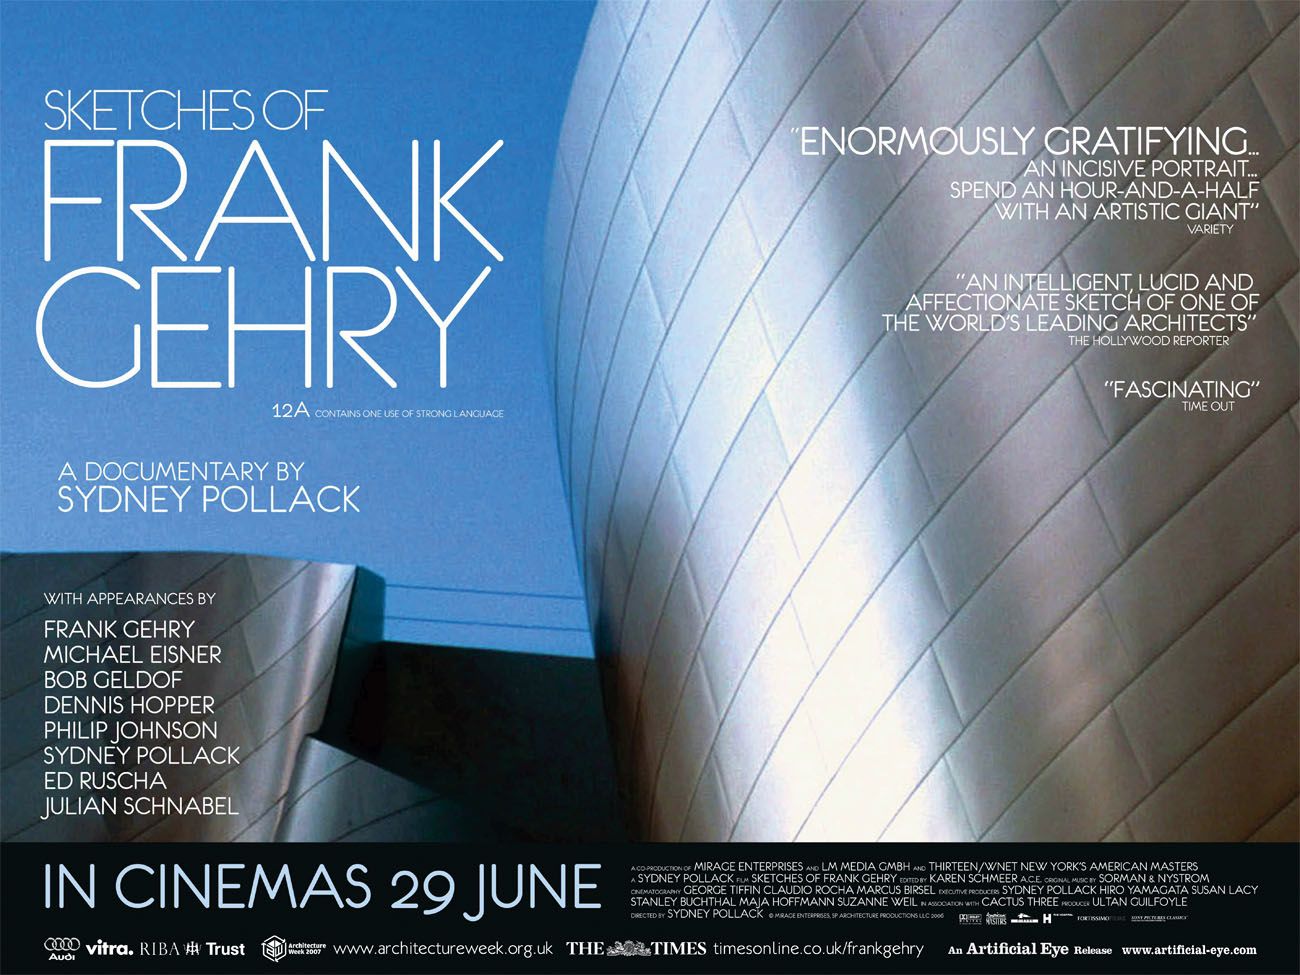 Extra Large Movie Poster Image for Sketches of Frank Gehry (#3 of 4)